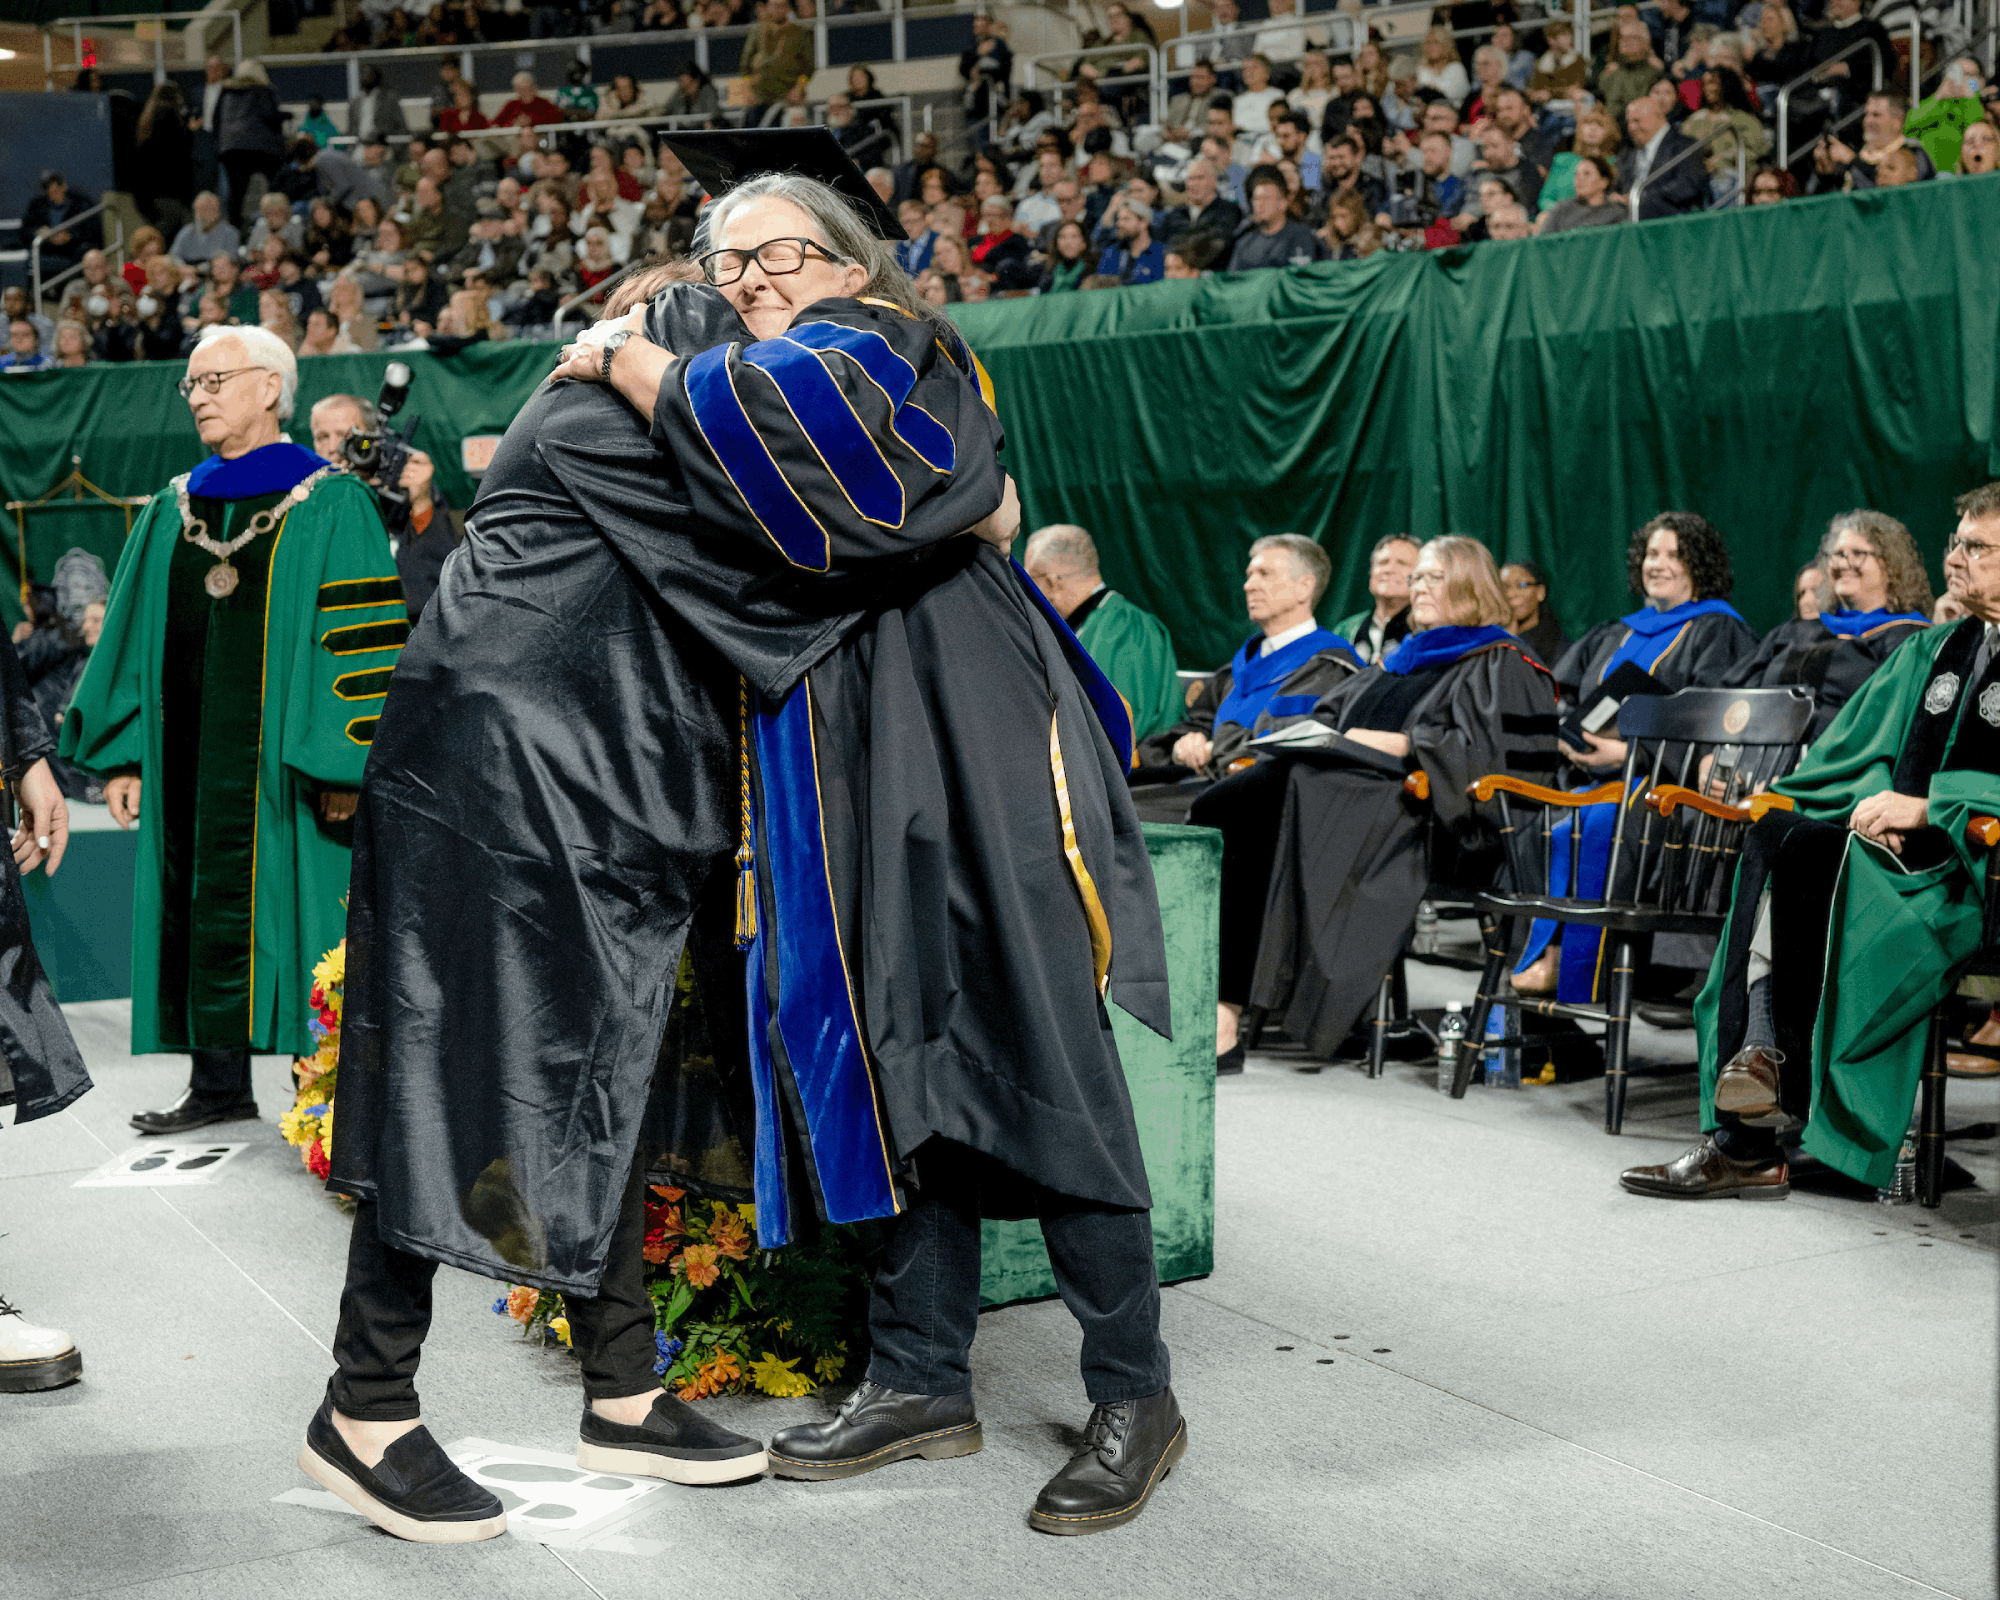 Graduating students receive a hug on stage during the Fall Commencement Ceremony.